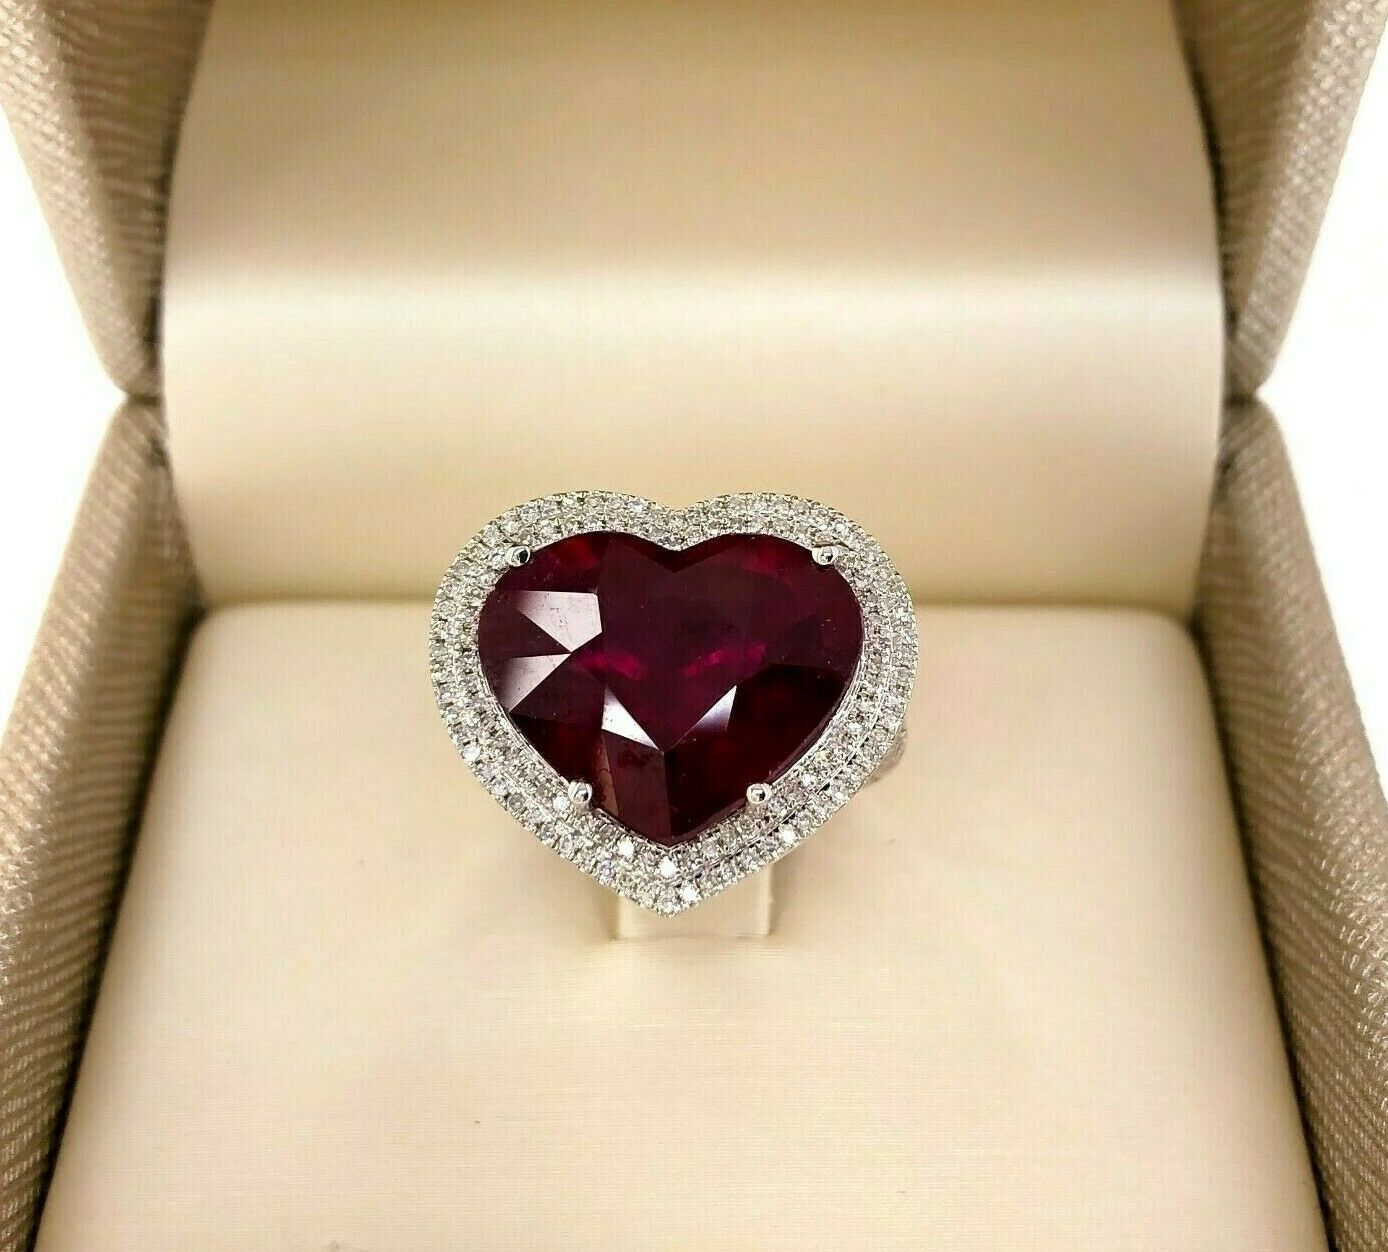 9.37 Carats t.w. Diamond and Heart Ruby Halo Ring Ruby is 8.91 Carats 18KW Gold